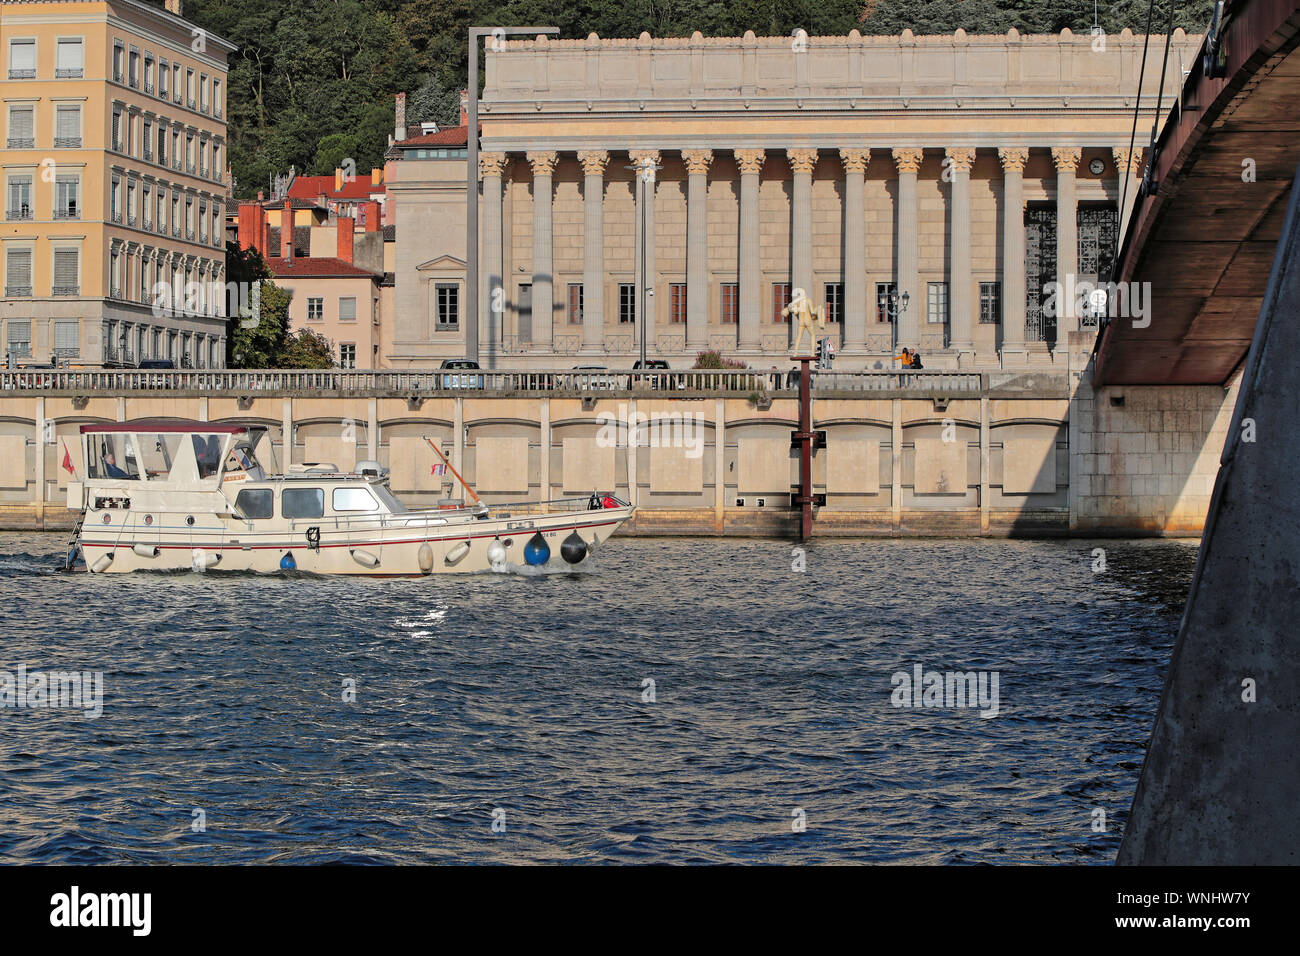 LYON, FRANCE, SEPTEMBER 6, 2019 : Boat under the Palais de justice historique de Lyon (historic court law), on the right bank of the Saone river, is c Stock Photo